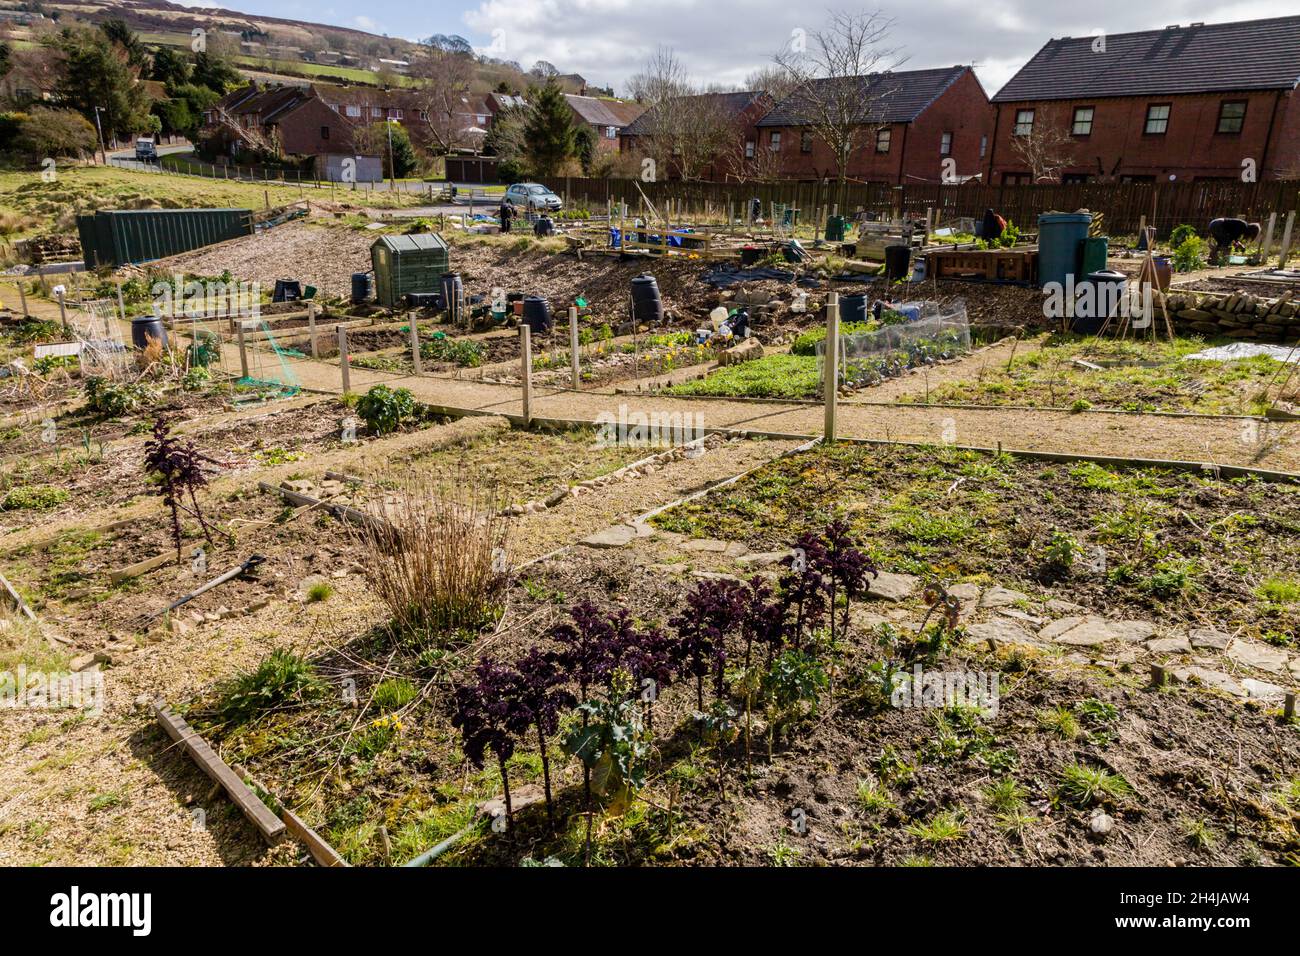 Allotments in Dod Naze, a small village above Hebden Bridge, West Yorkshire. Stock Photo